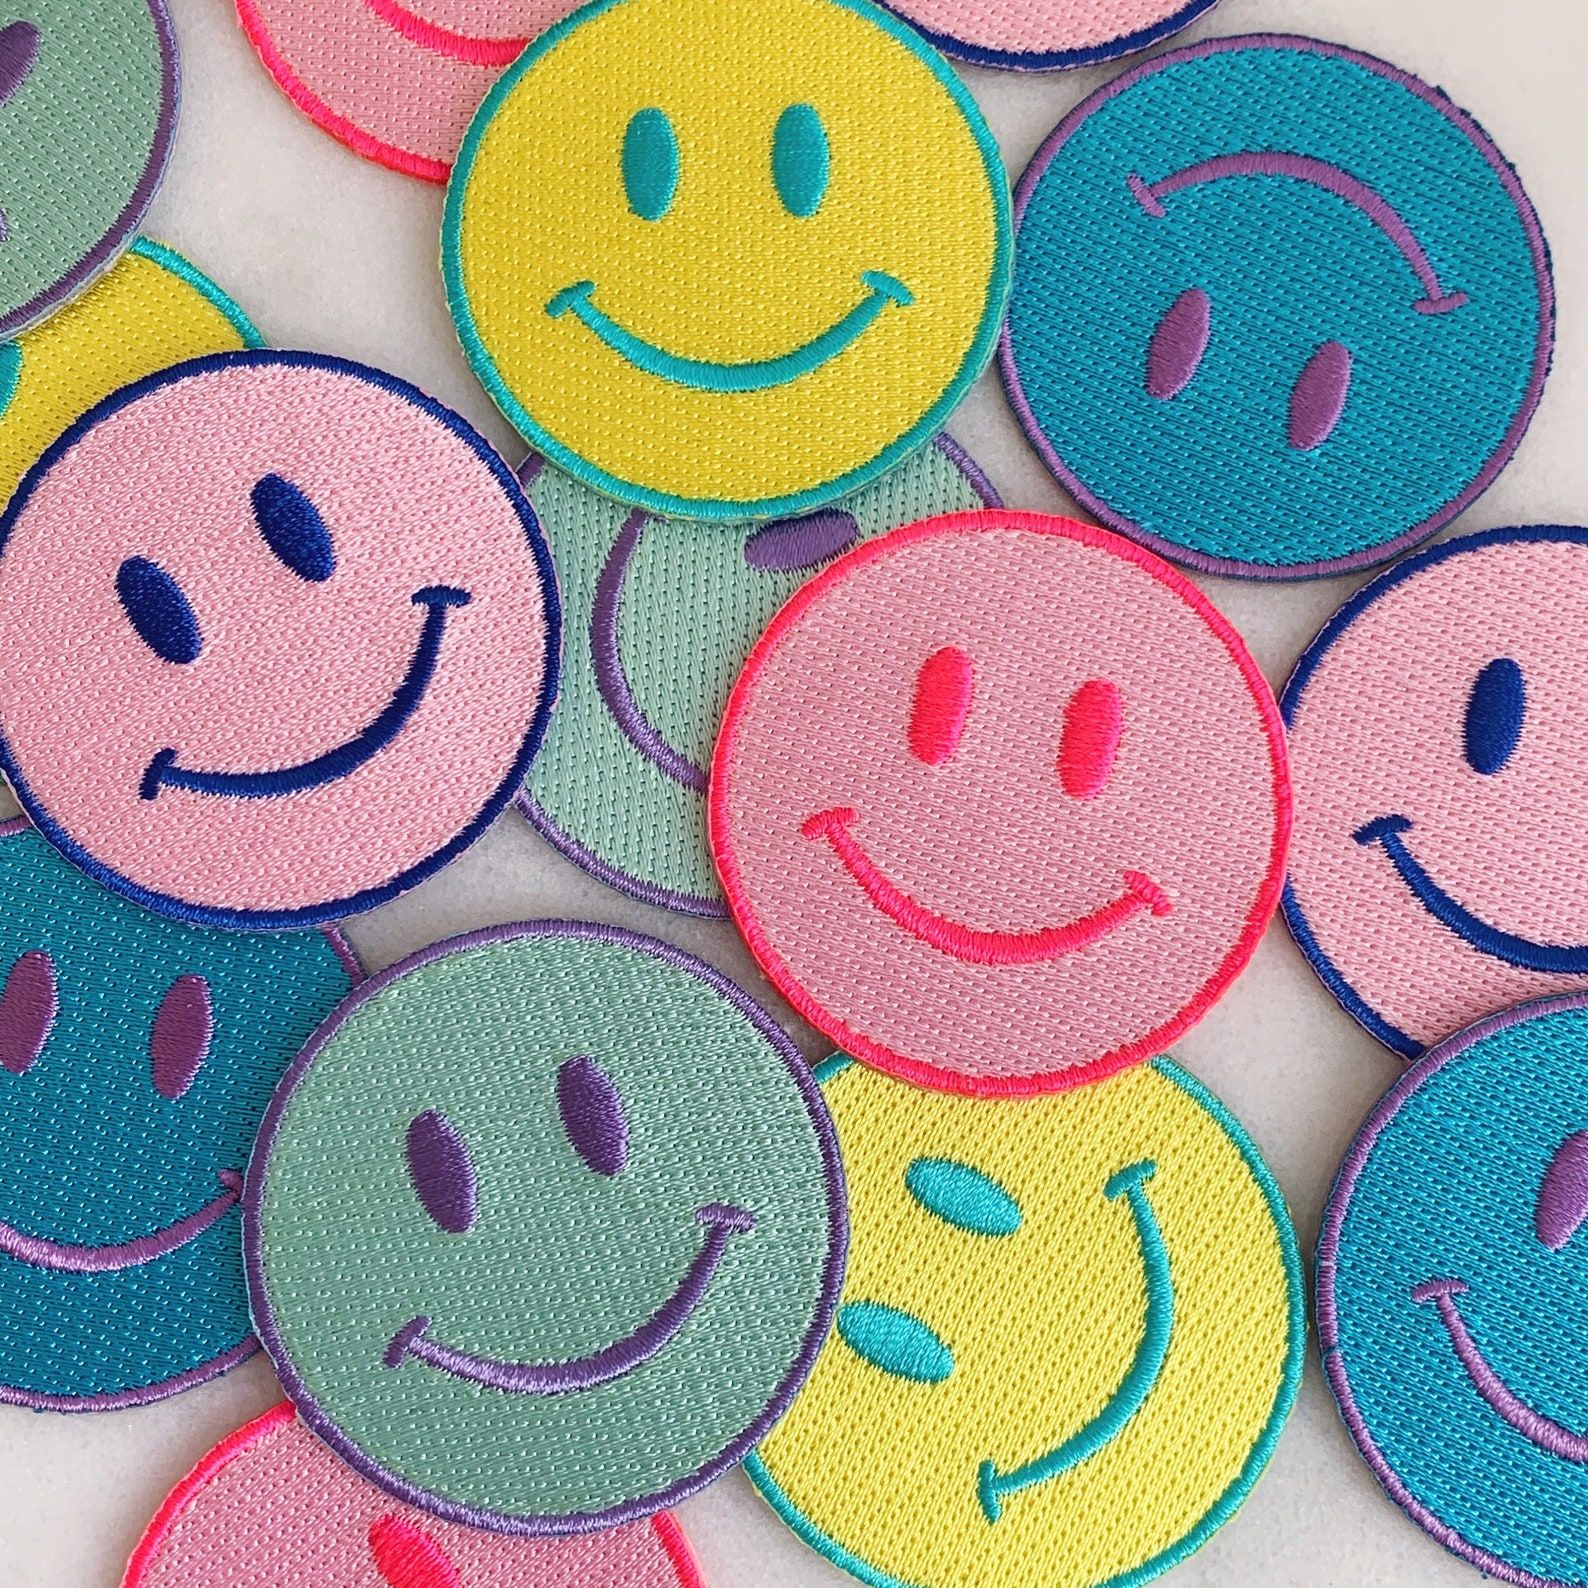 Smiley Face Iron On Patch